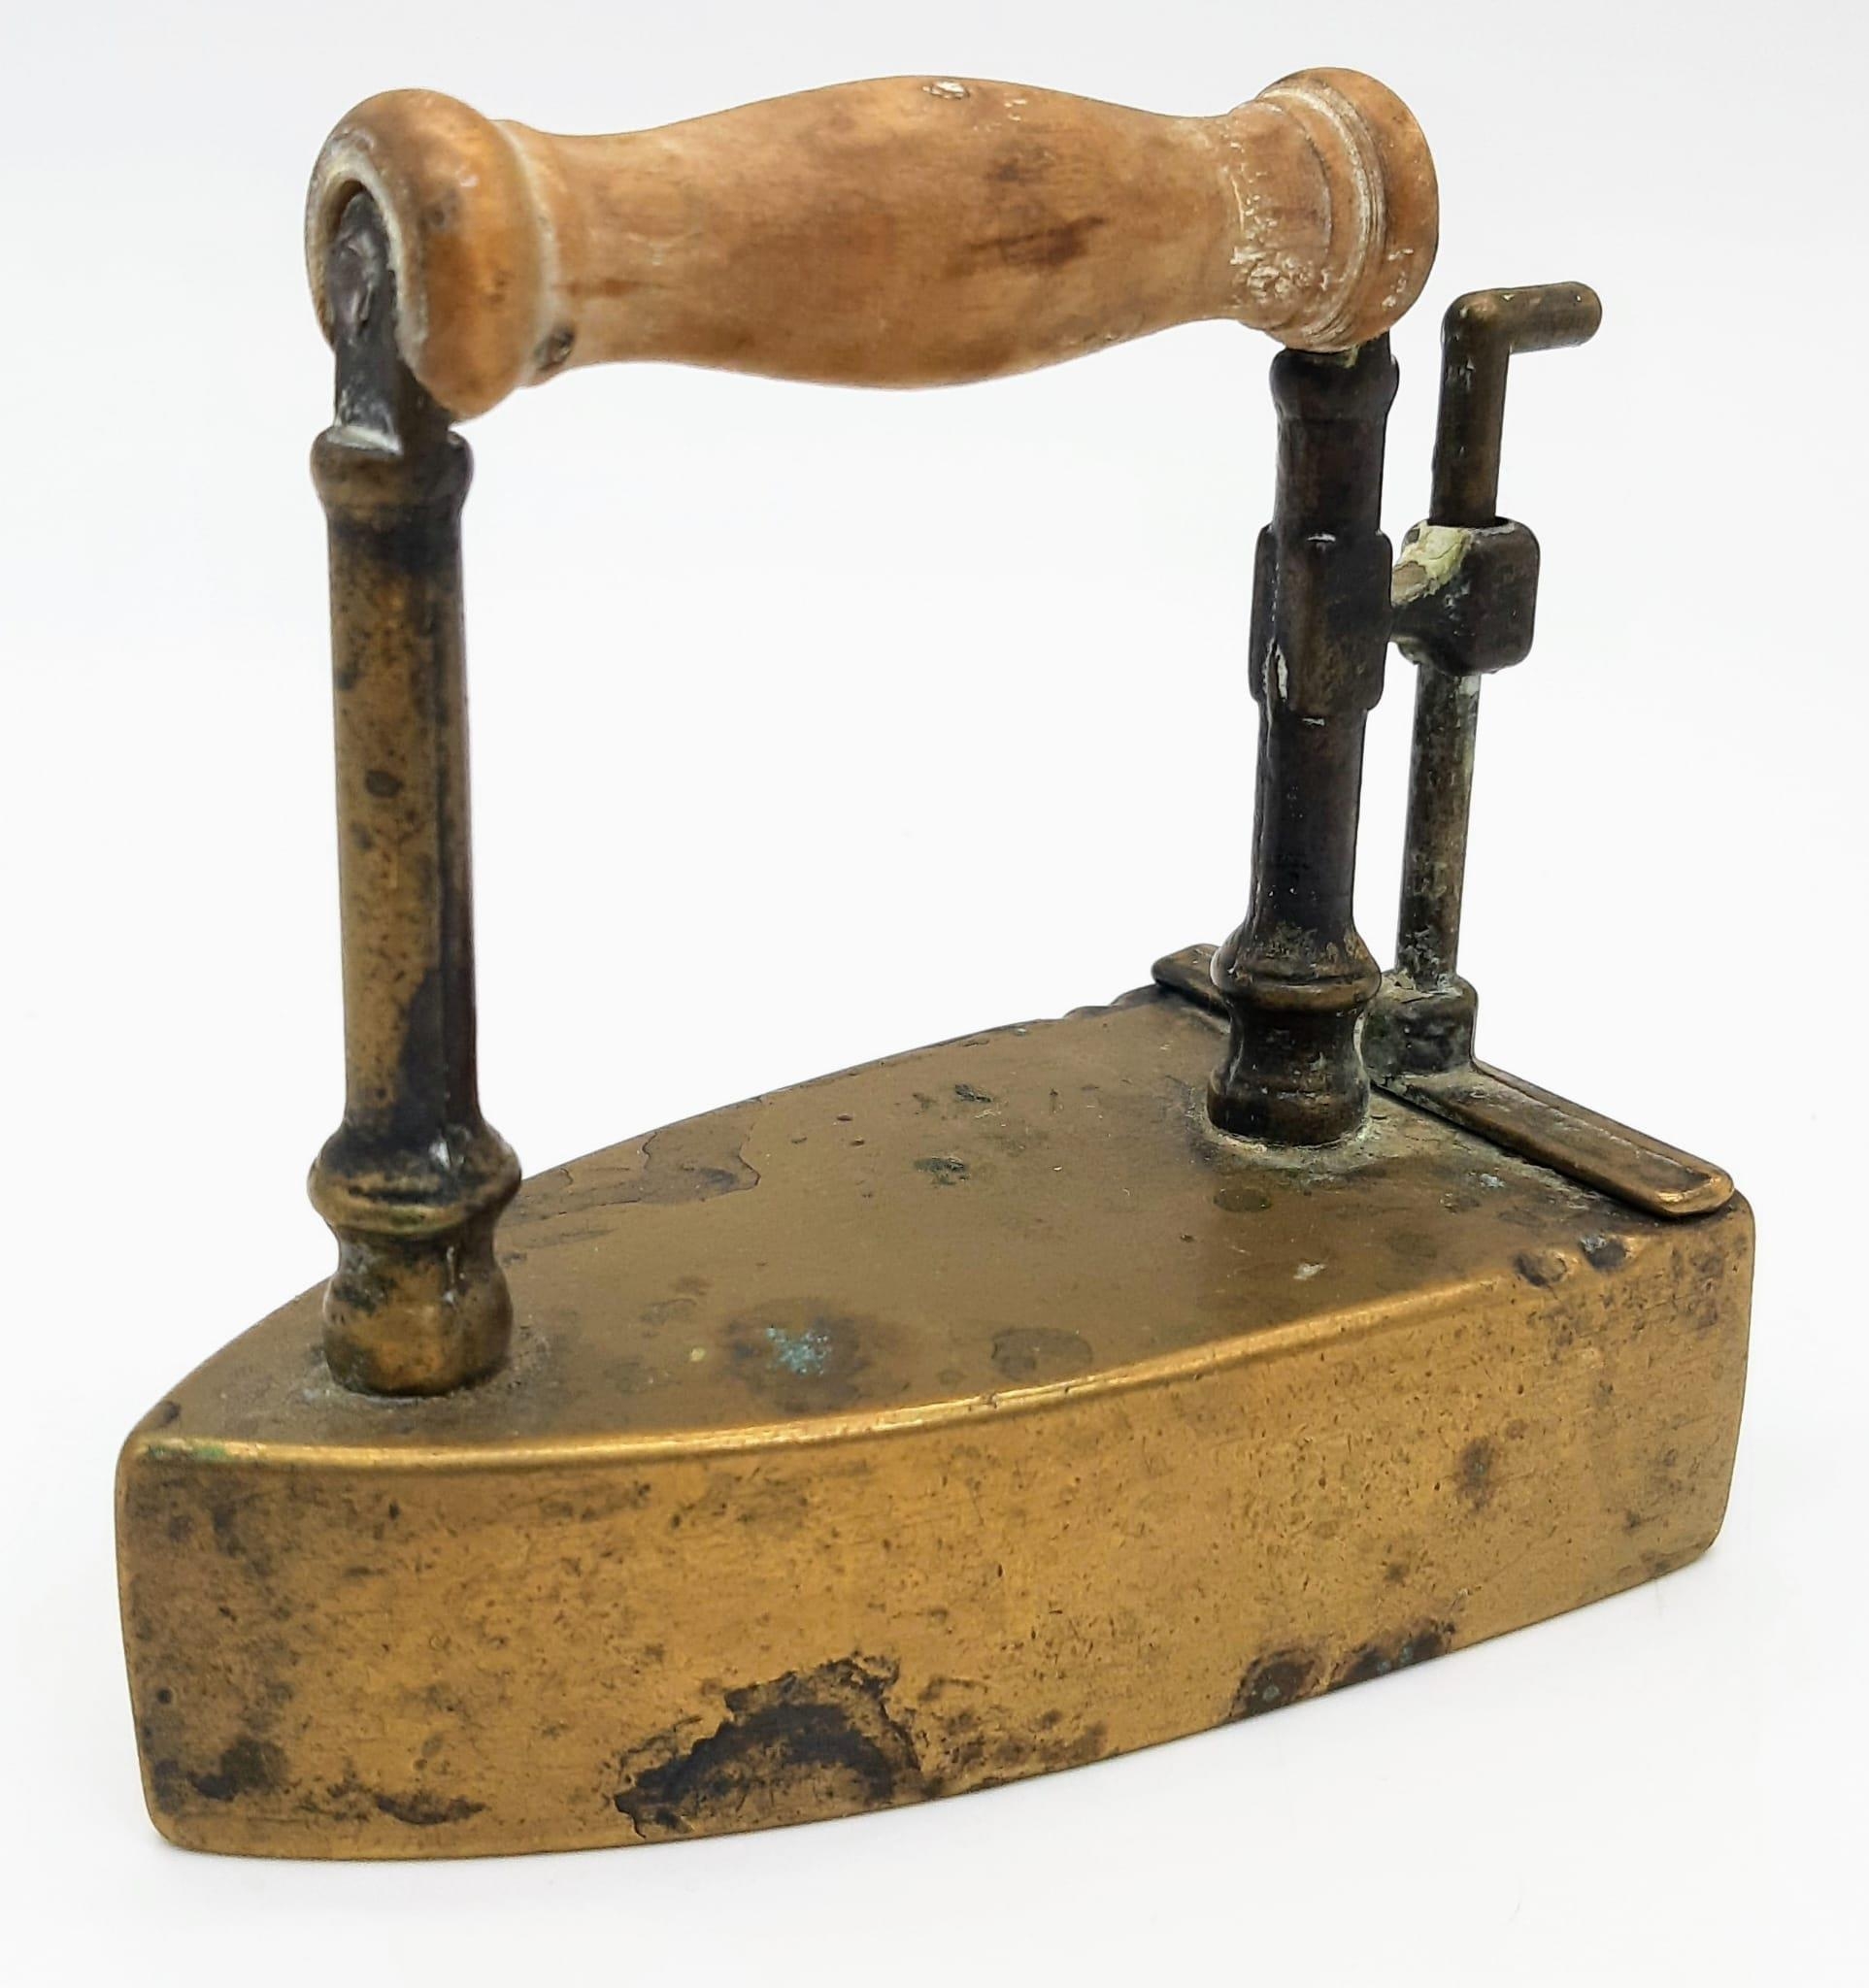 An Antique Small Brass Flat Iron with Opening for Hot Coals! 10cm x 10cm. - Image 2 of 9